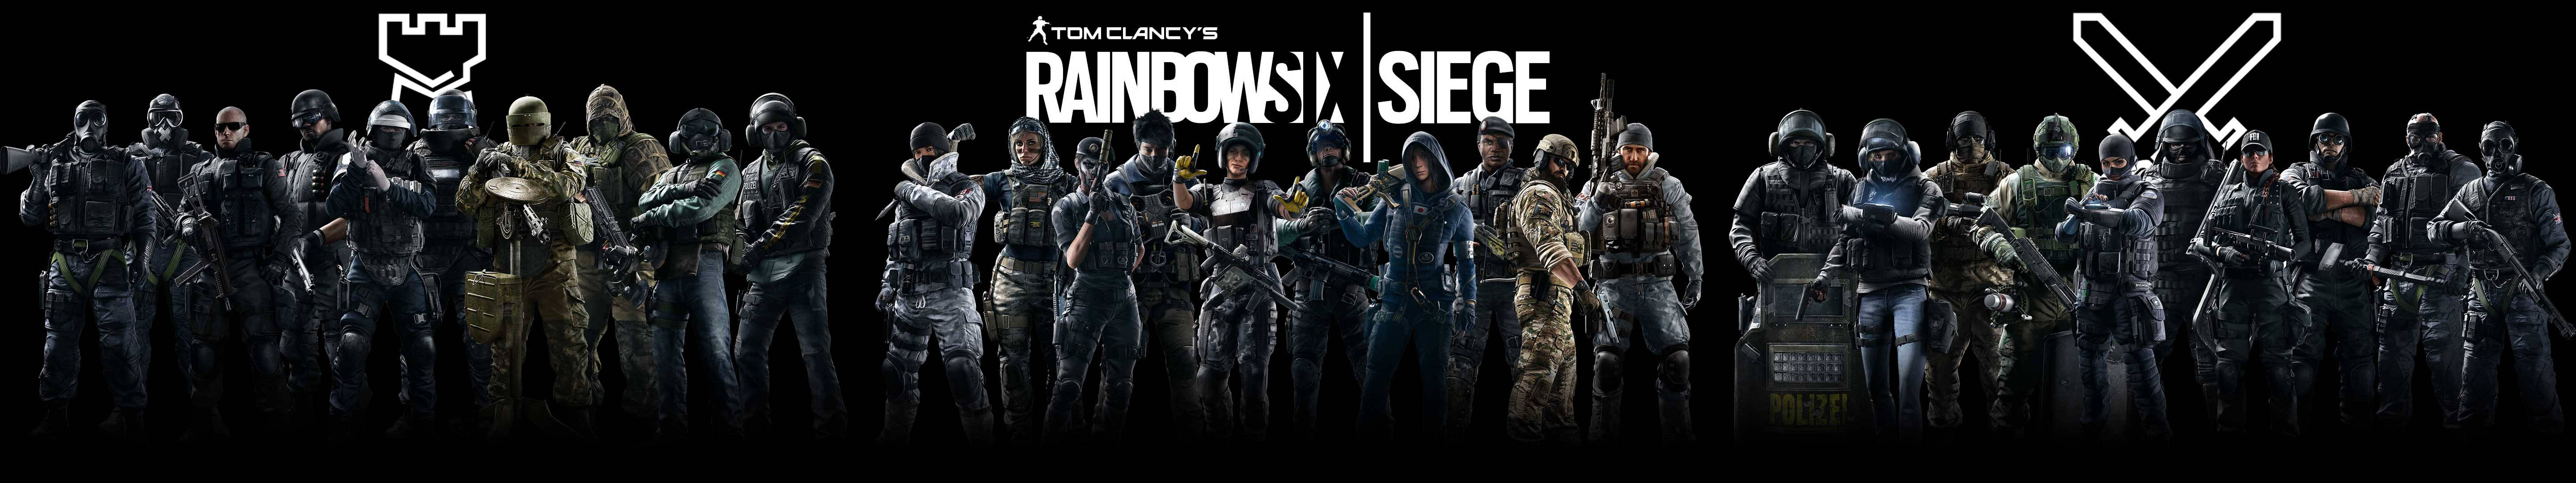 5760X1080 Rainbow Six Siege Wallpaper and Background